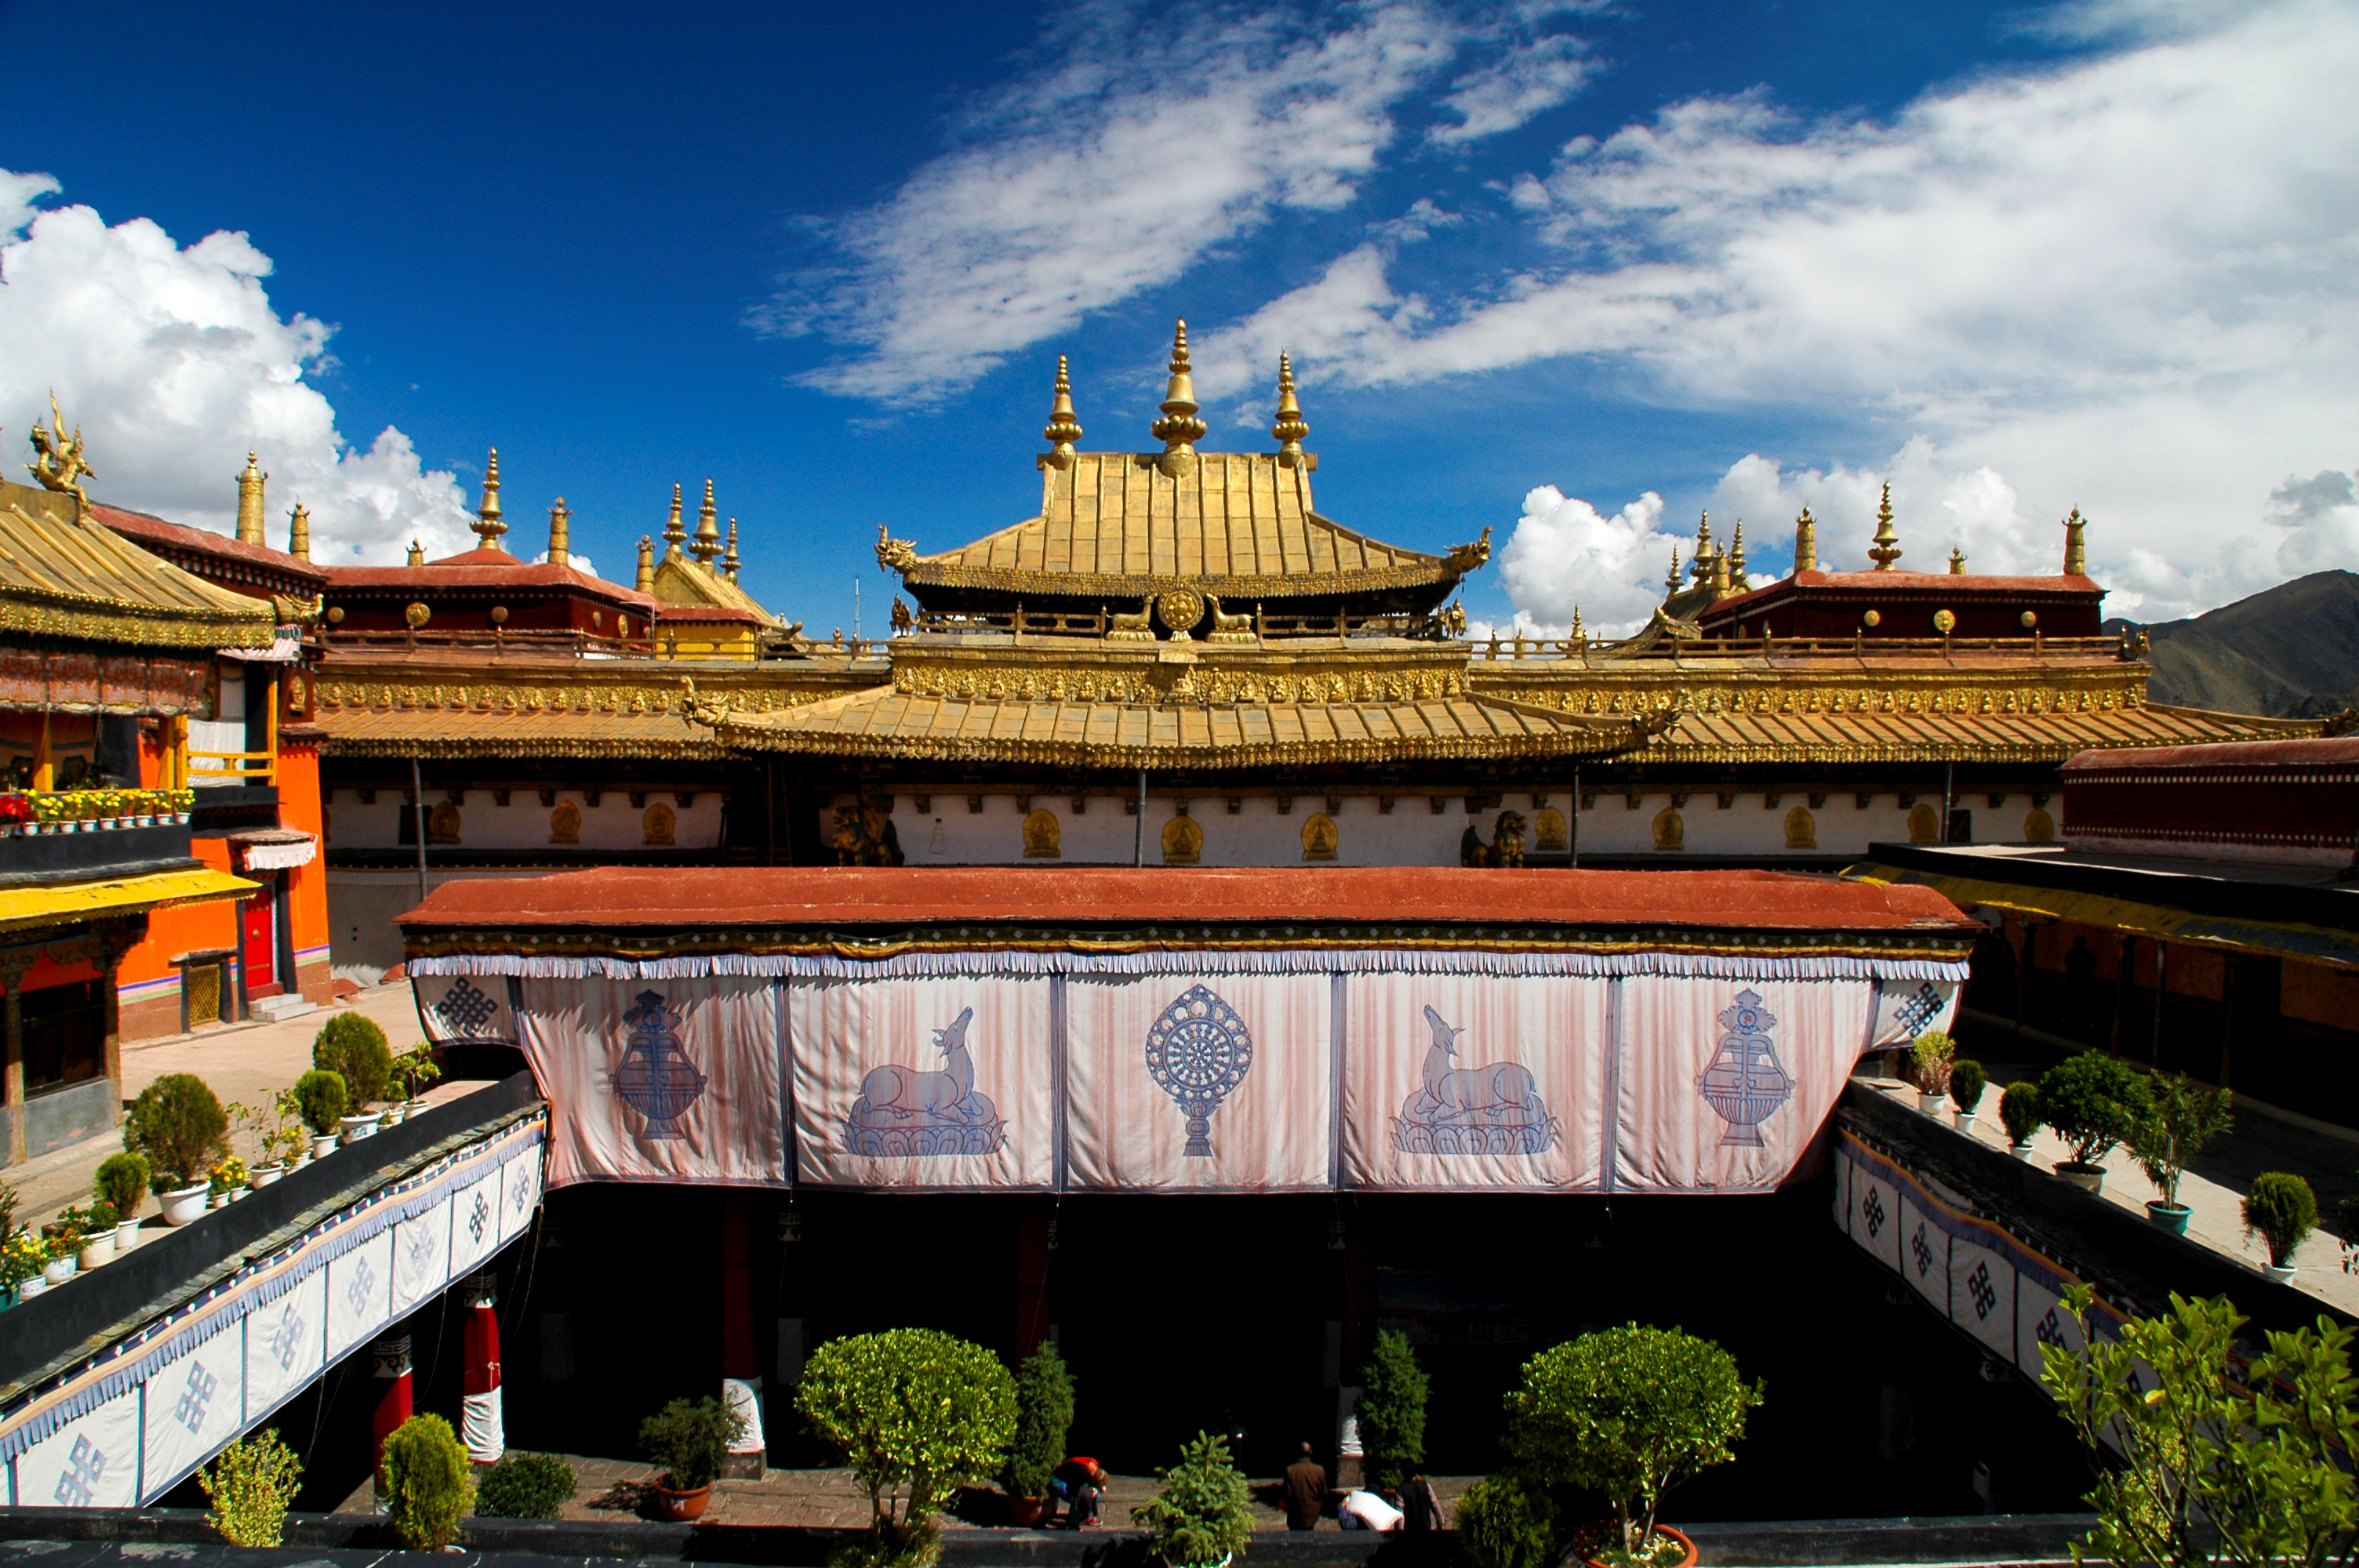 The golden roof on Jokhang Temple, Lhasa